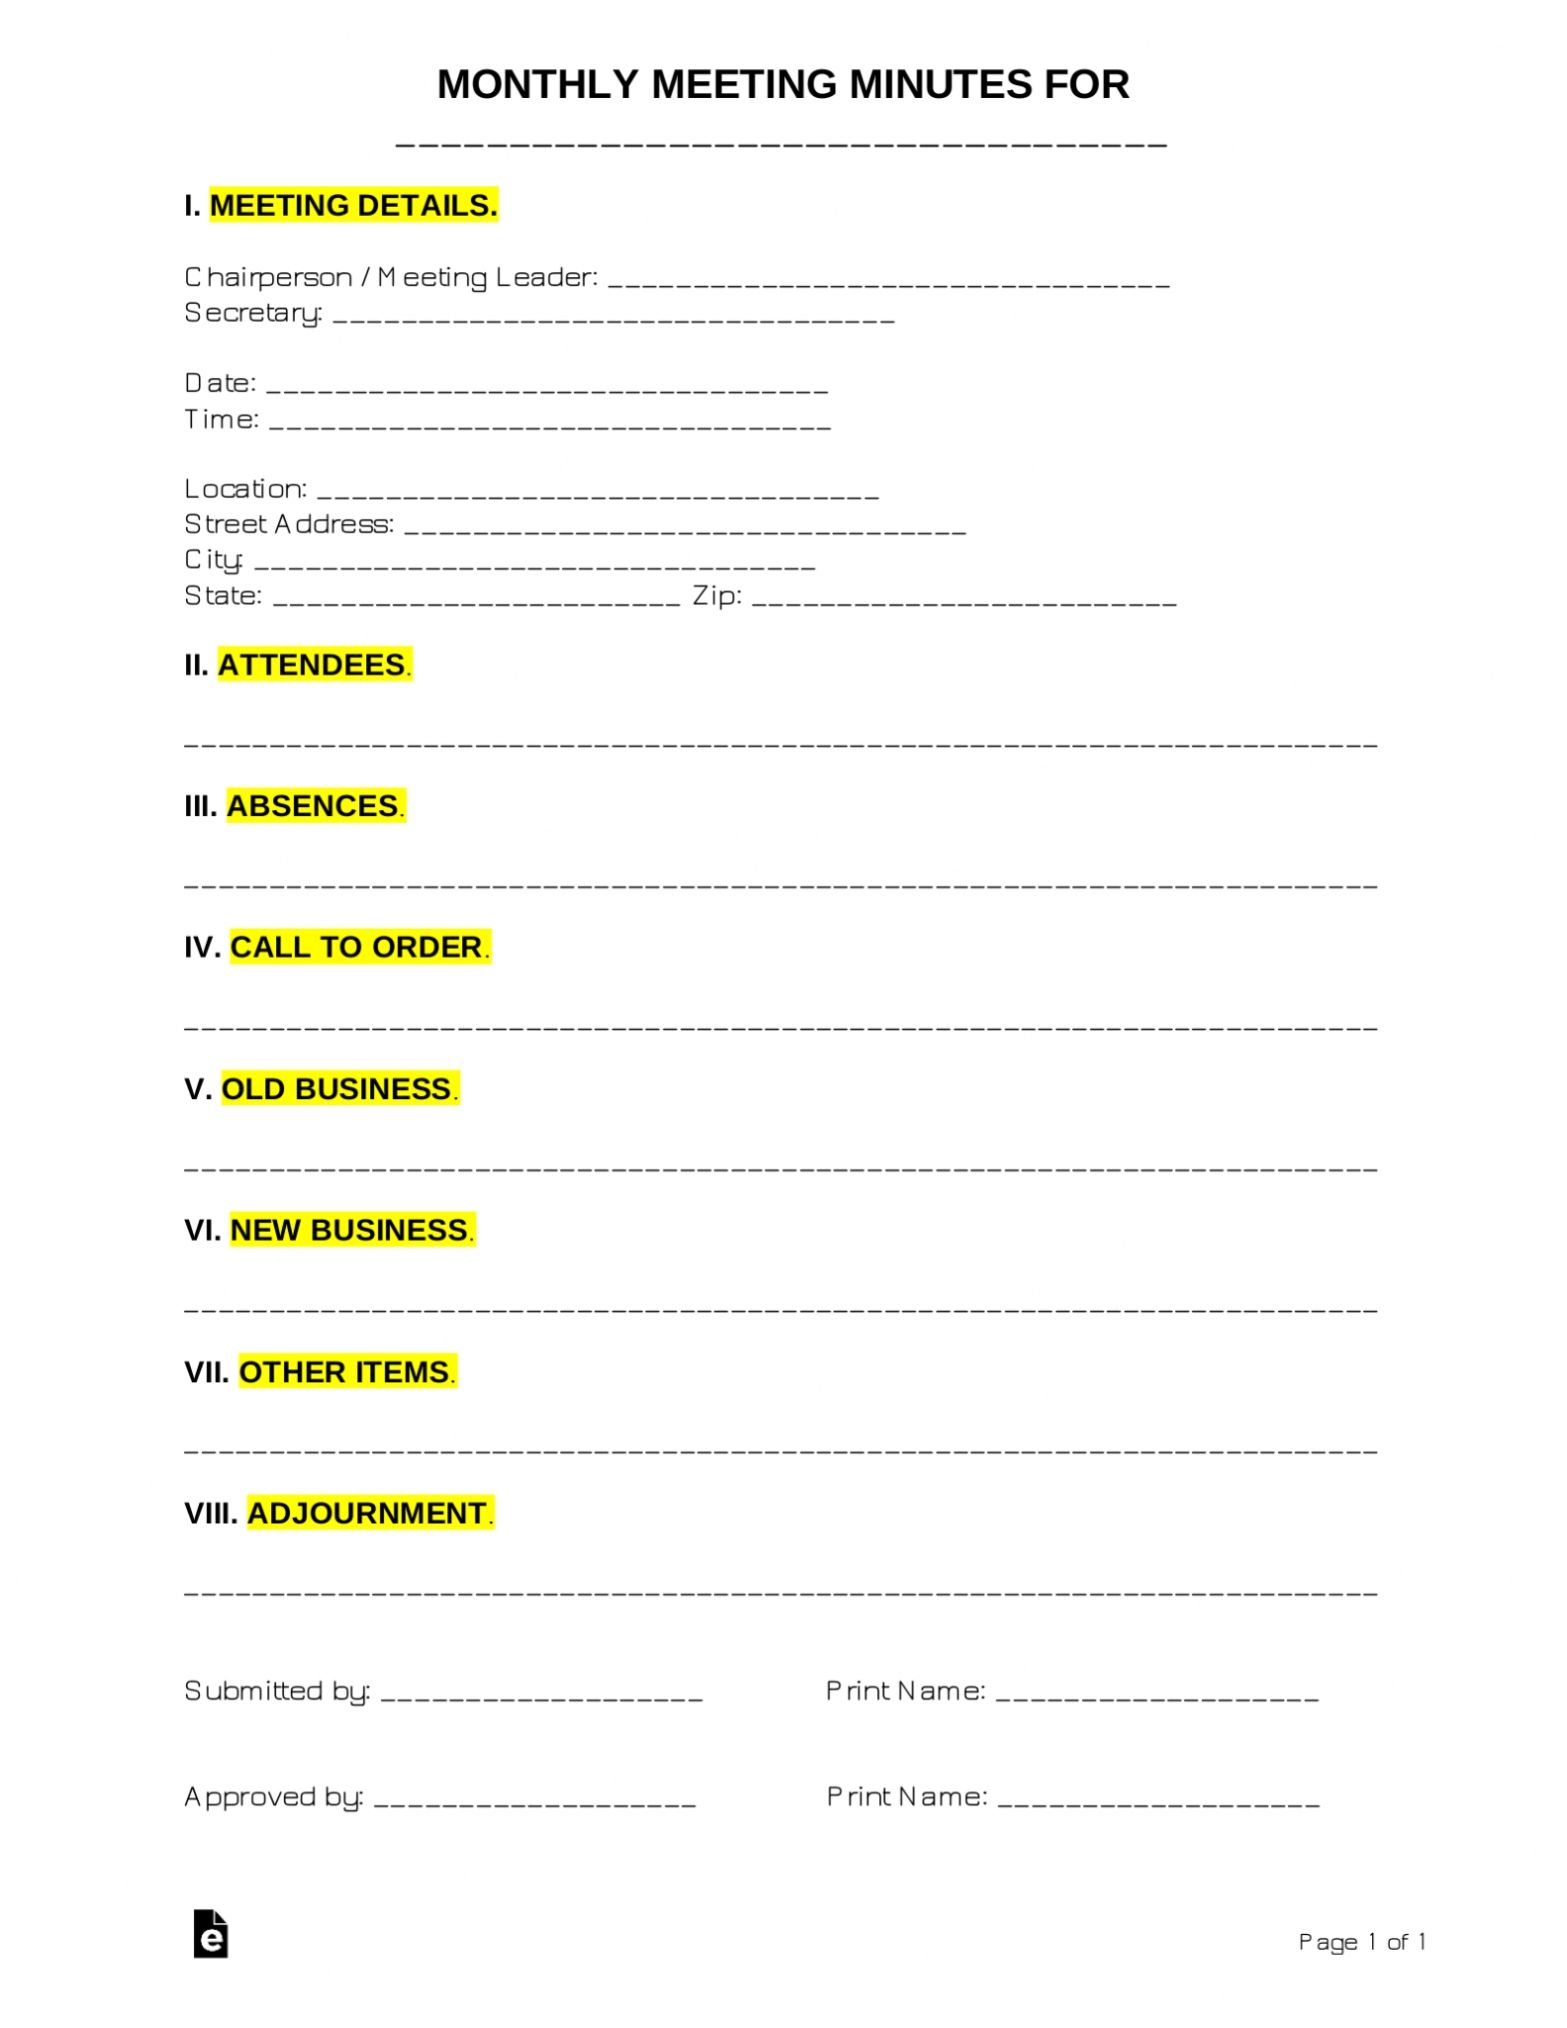 Free Monthly Meeting Minutes Template | Sample – Pdf | Word – Eforms Inside Minutes Of The Meeting Template